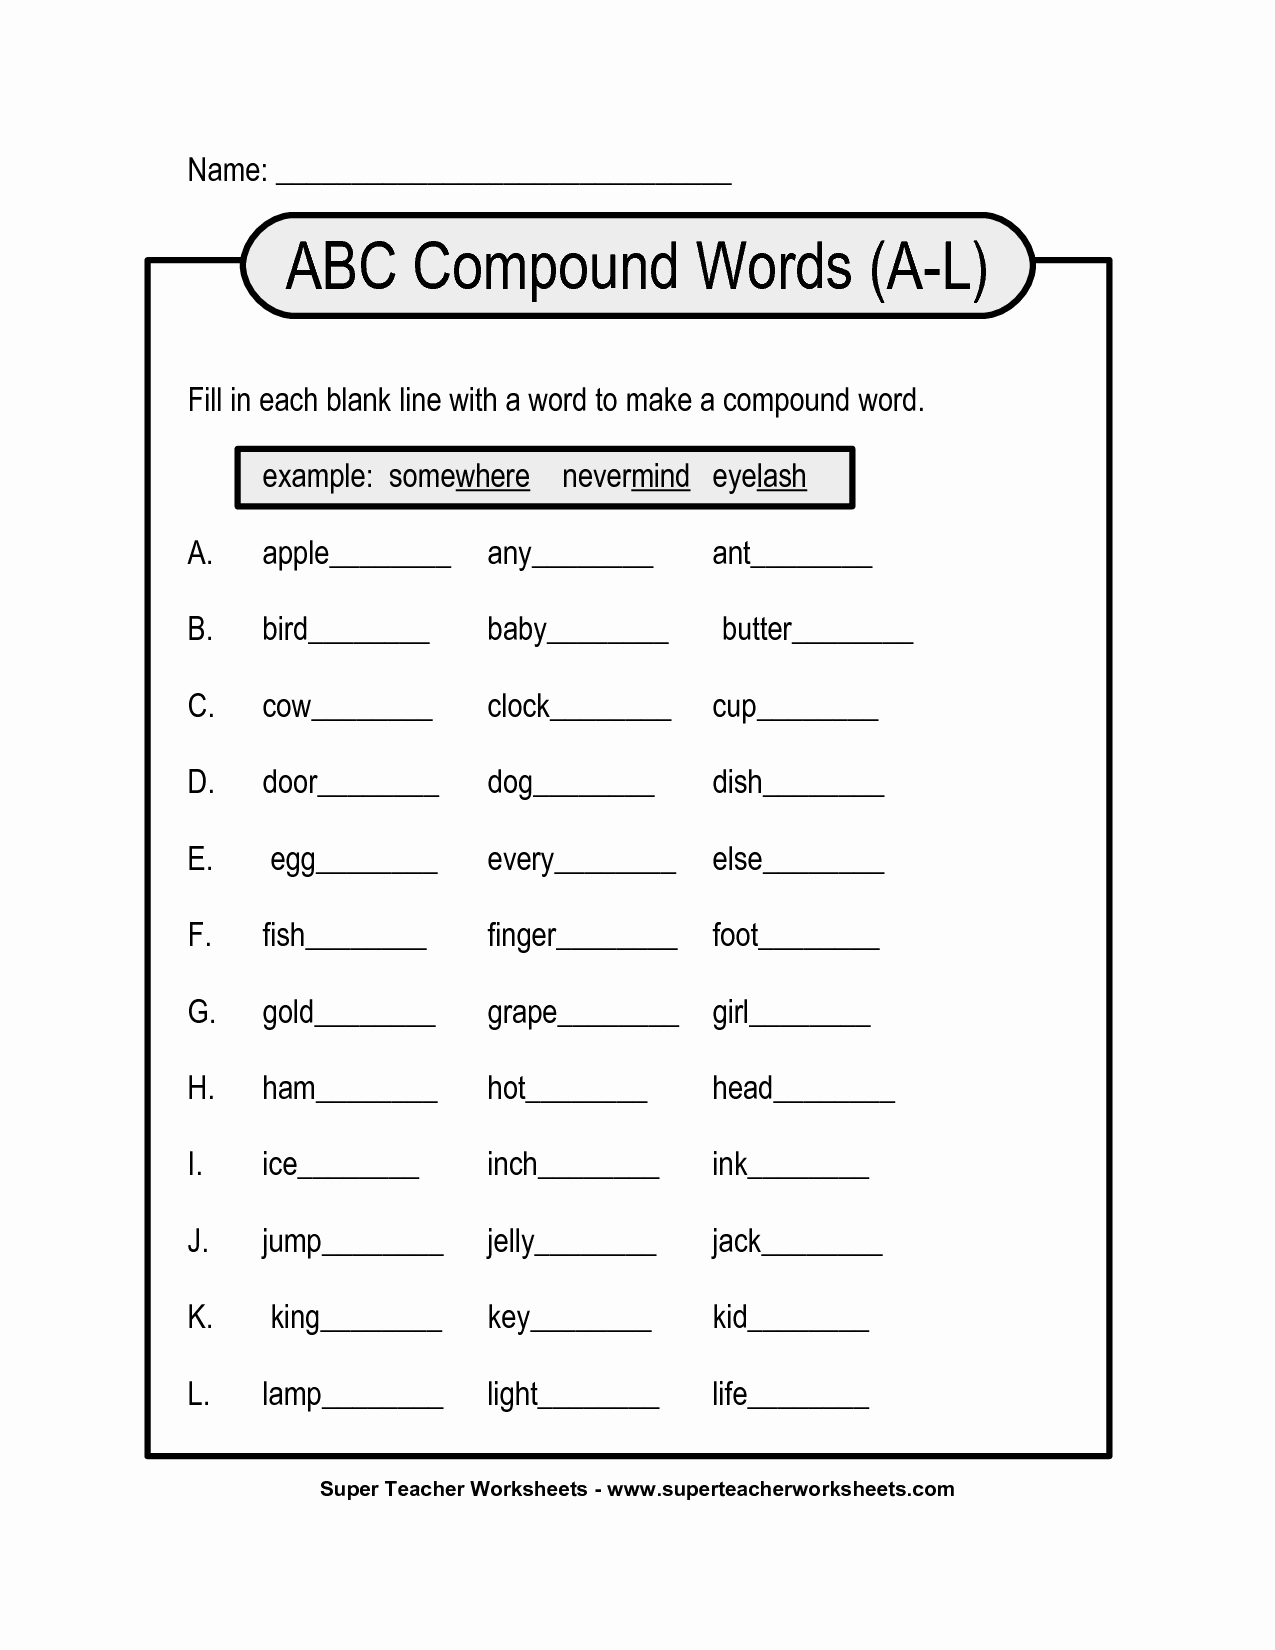 Free Printable Compound Word Worksheets Awesome 14 Best Of Pound Words Worksheets Pdf 2nd